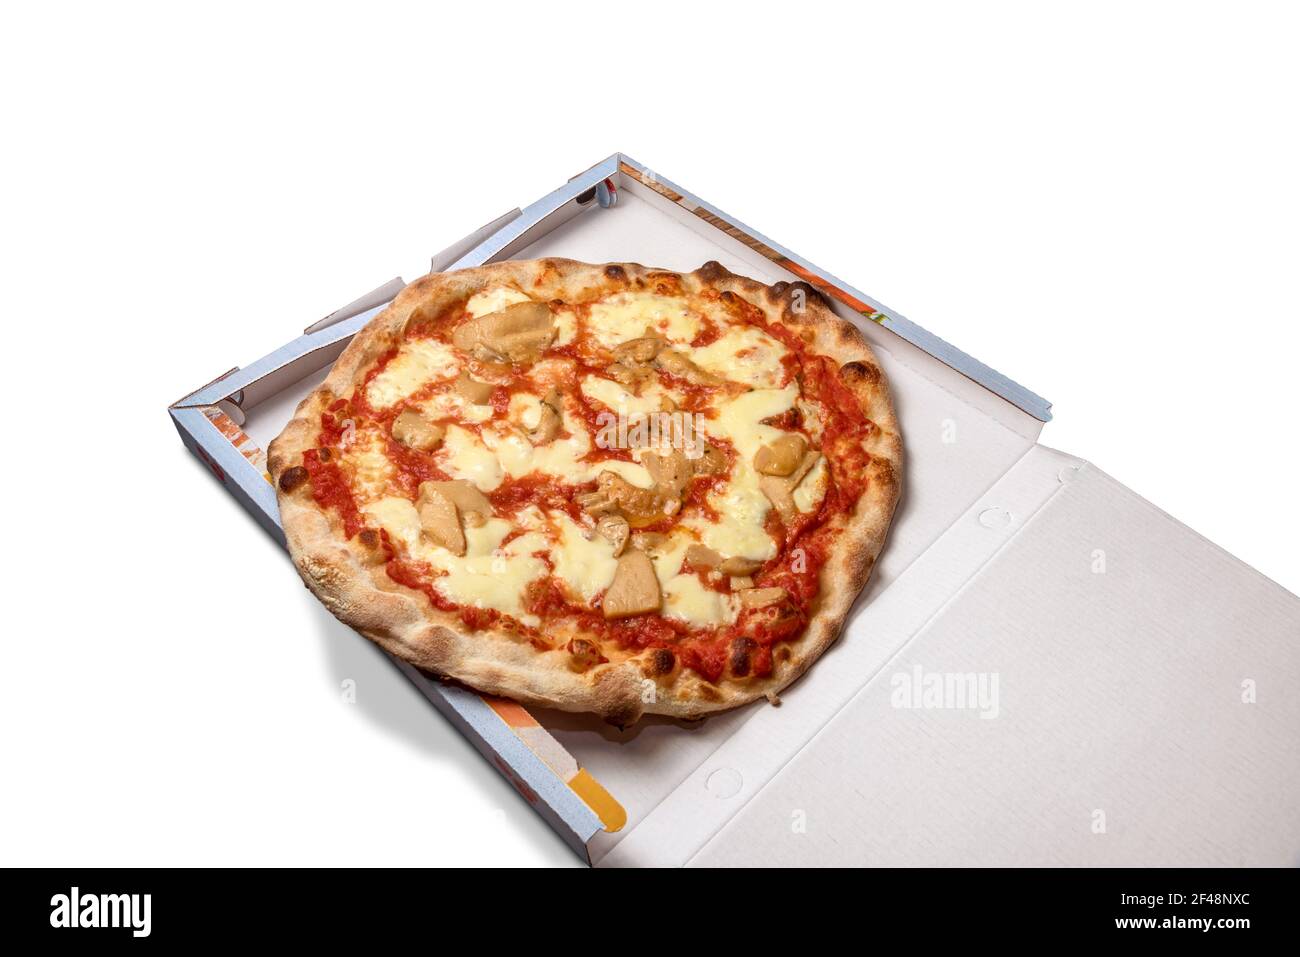 Food in take away or delivery box, pizza with tomato mozzarella sauce and porcini mushrooms. Isolated on white, copy space Stock Photo